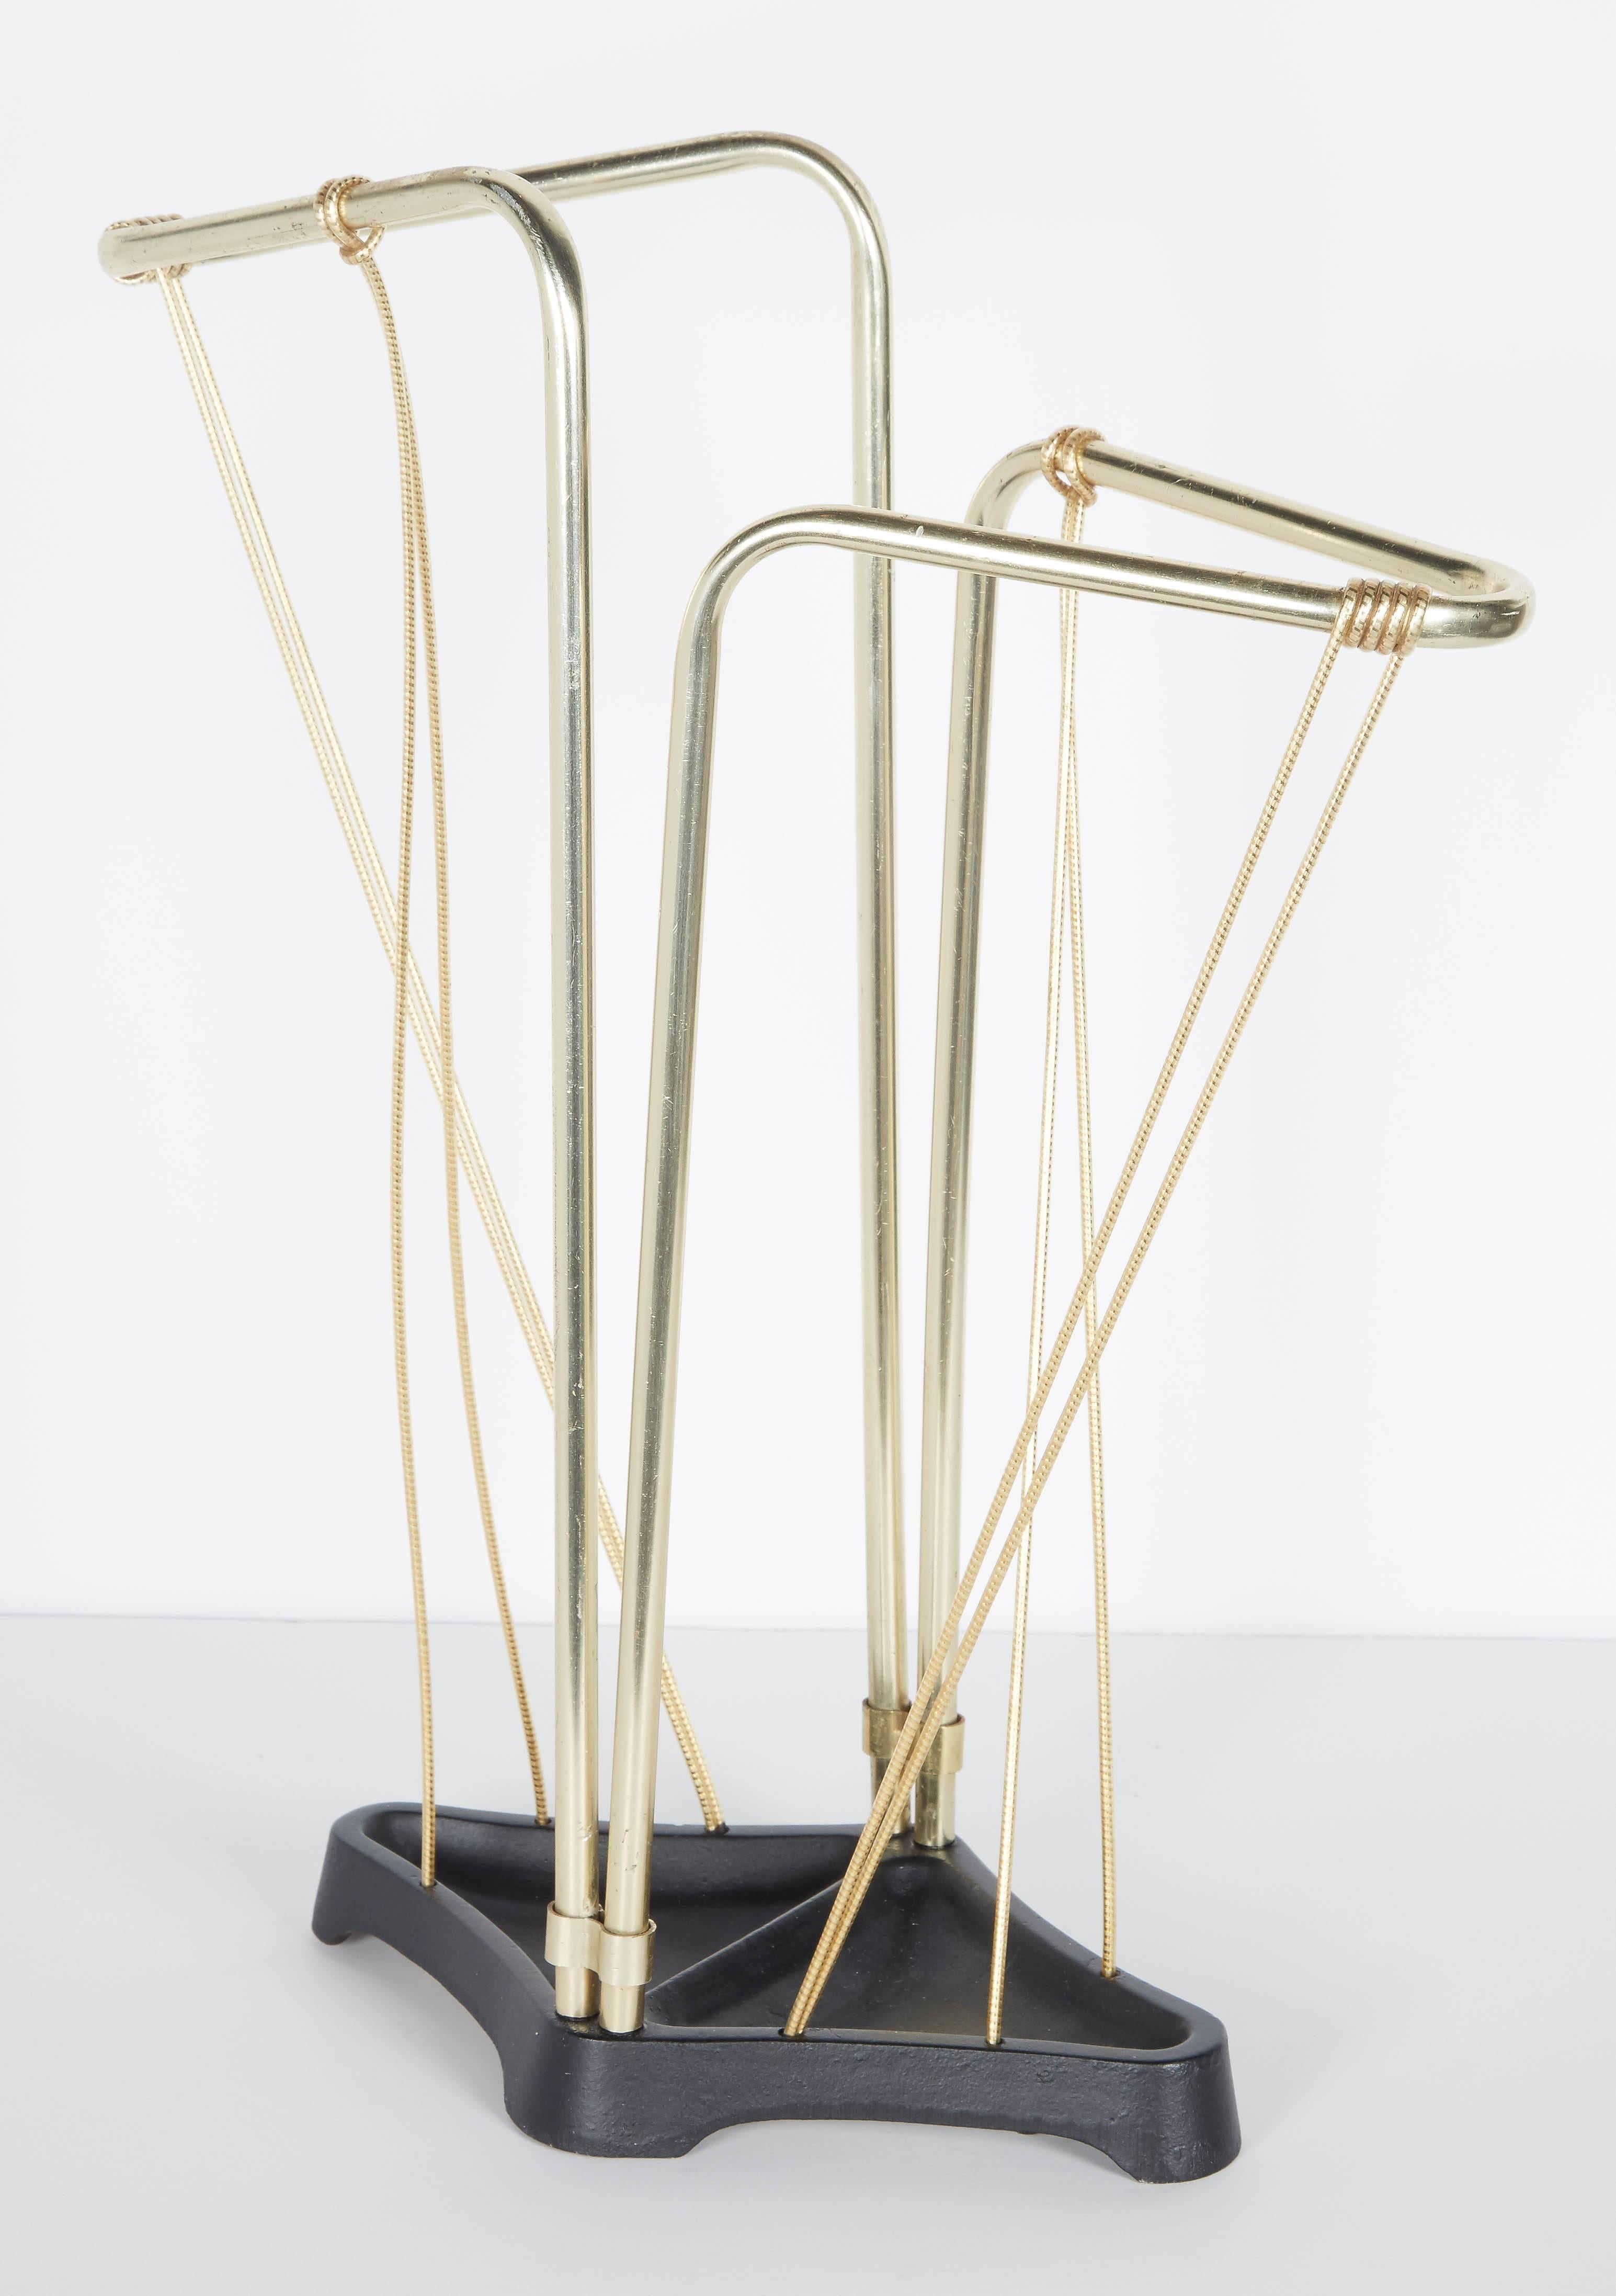 Outstanding Mid-Century umbrella stand with ultra modernist design. The stand features a winged form with asymmetrical design. Comprised of brass tubular metal with a black enameled wrought iron diamond shaped base. The umbrella stand also features